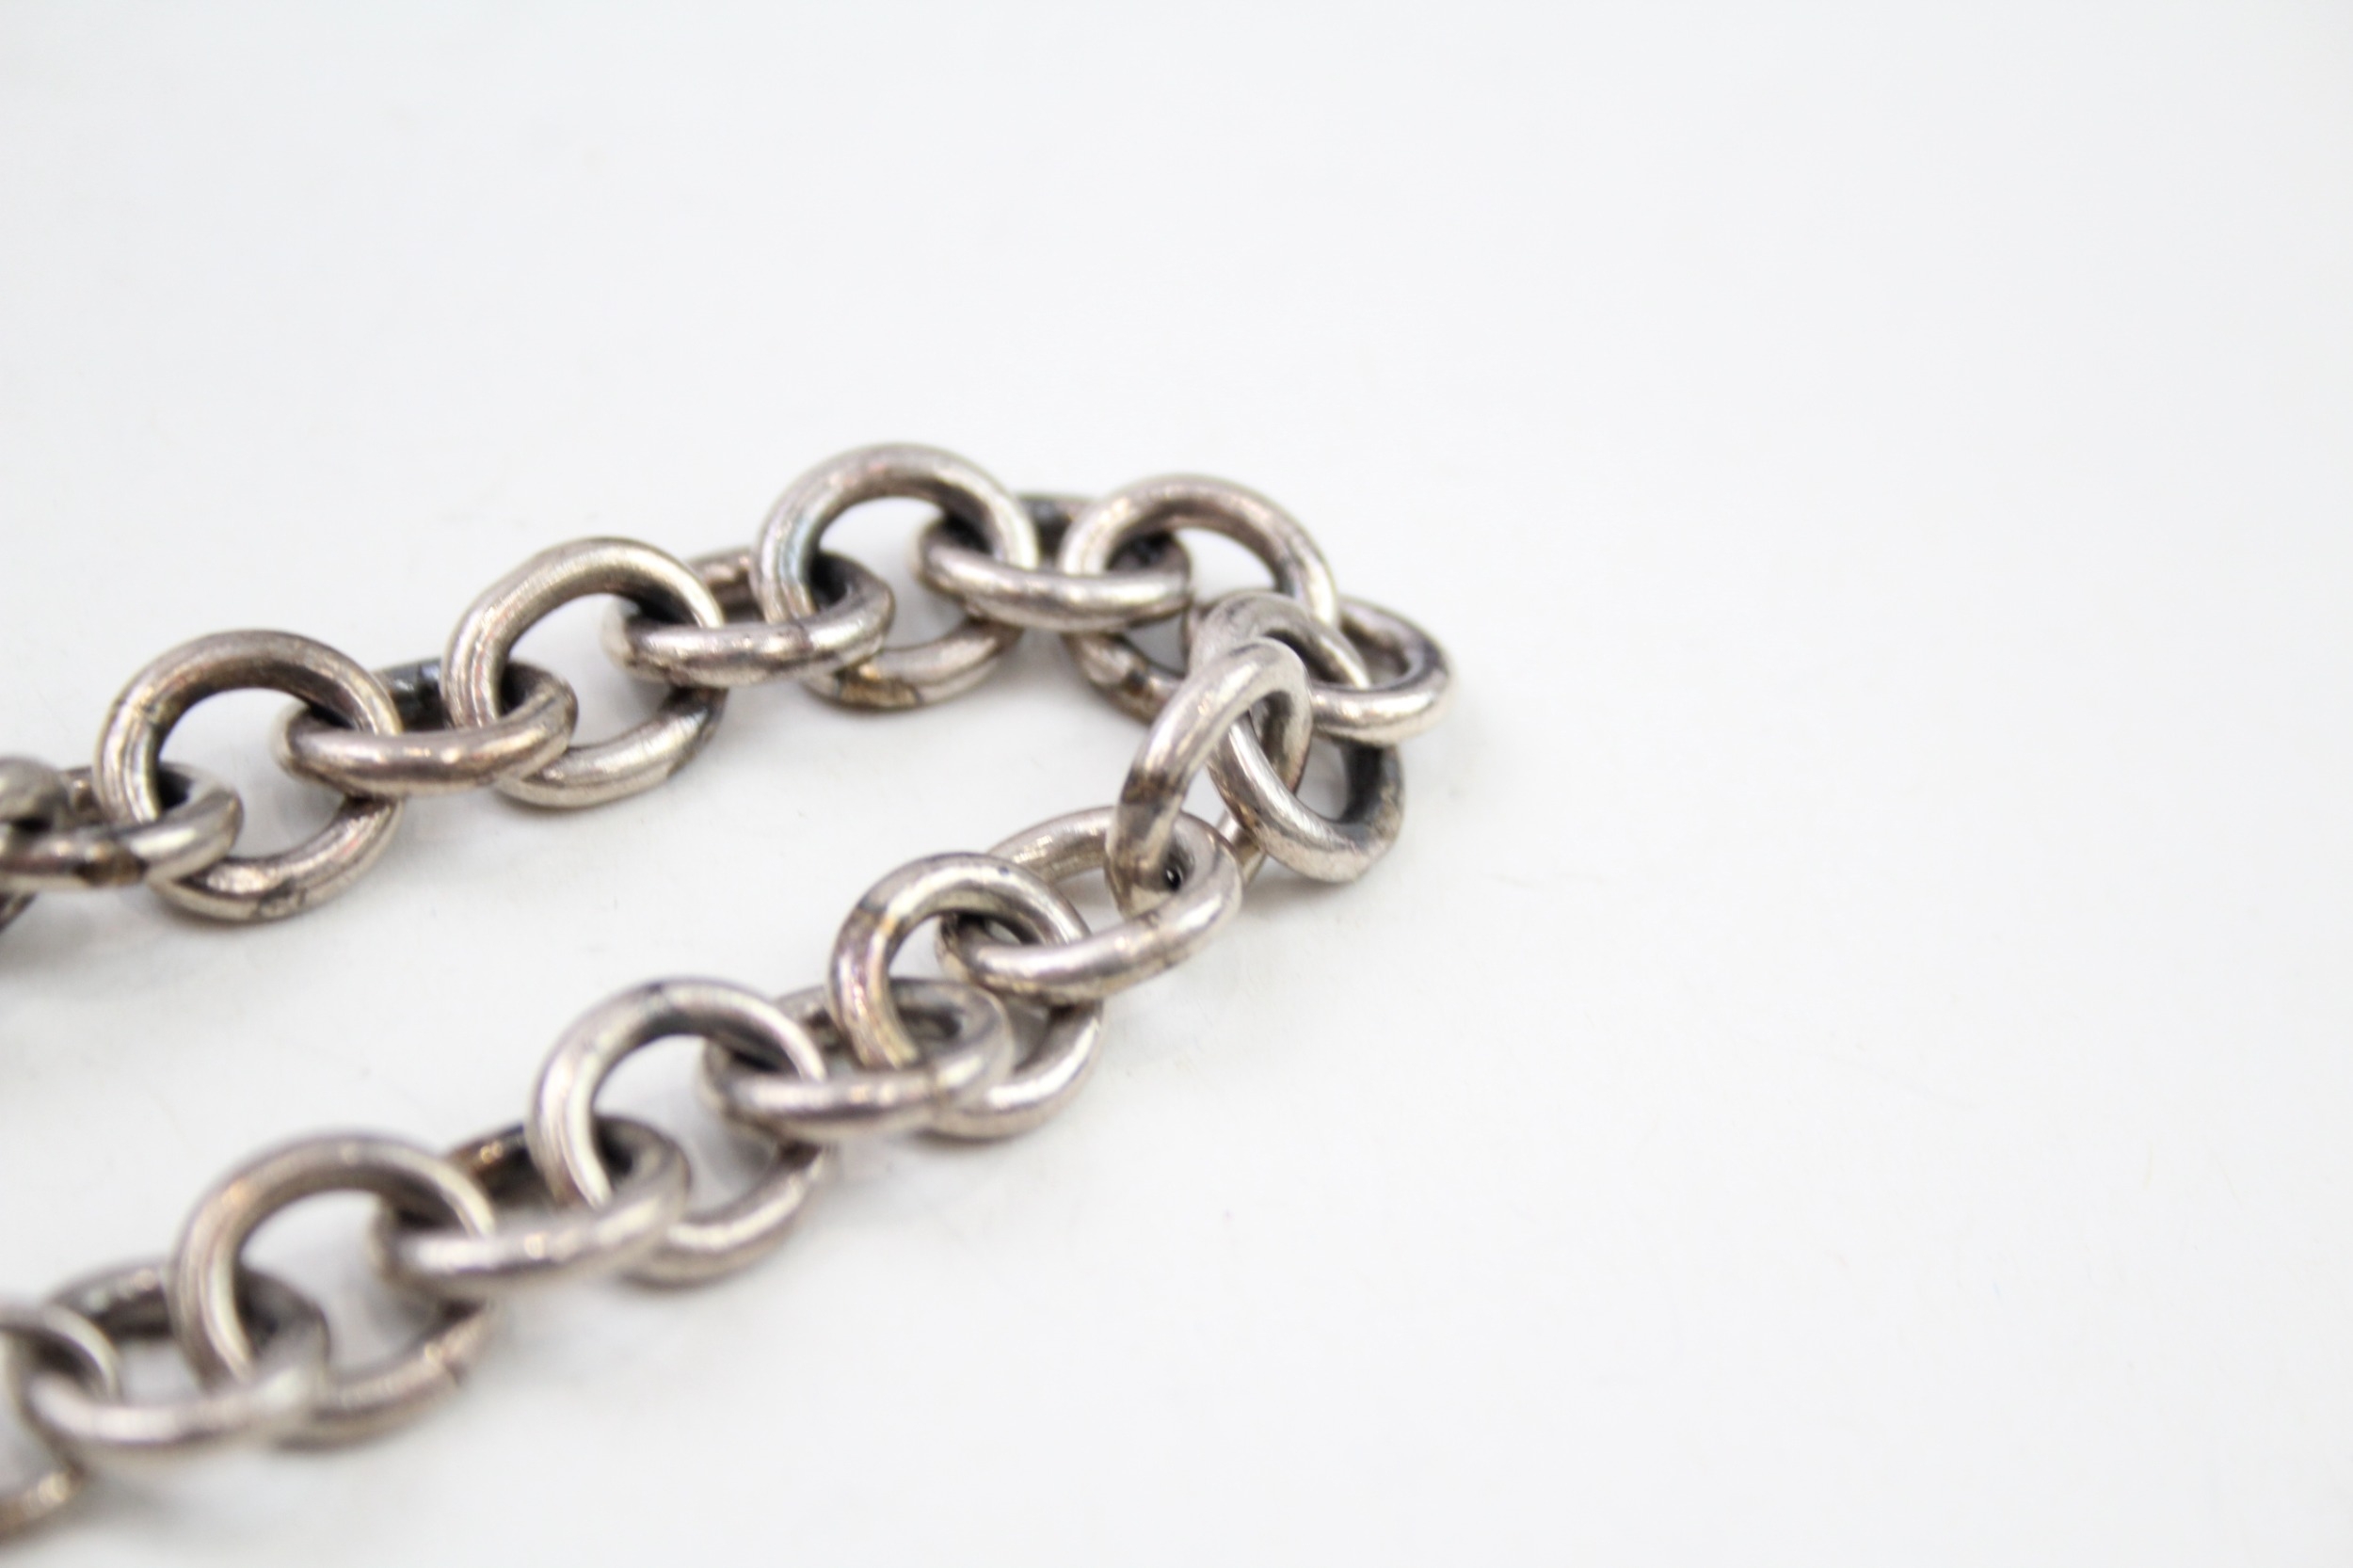 Silver belcher link bracelet with heart tag by designer Tiffany & Co, replacement clasp (33g) - Image 4 of 7